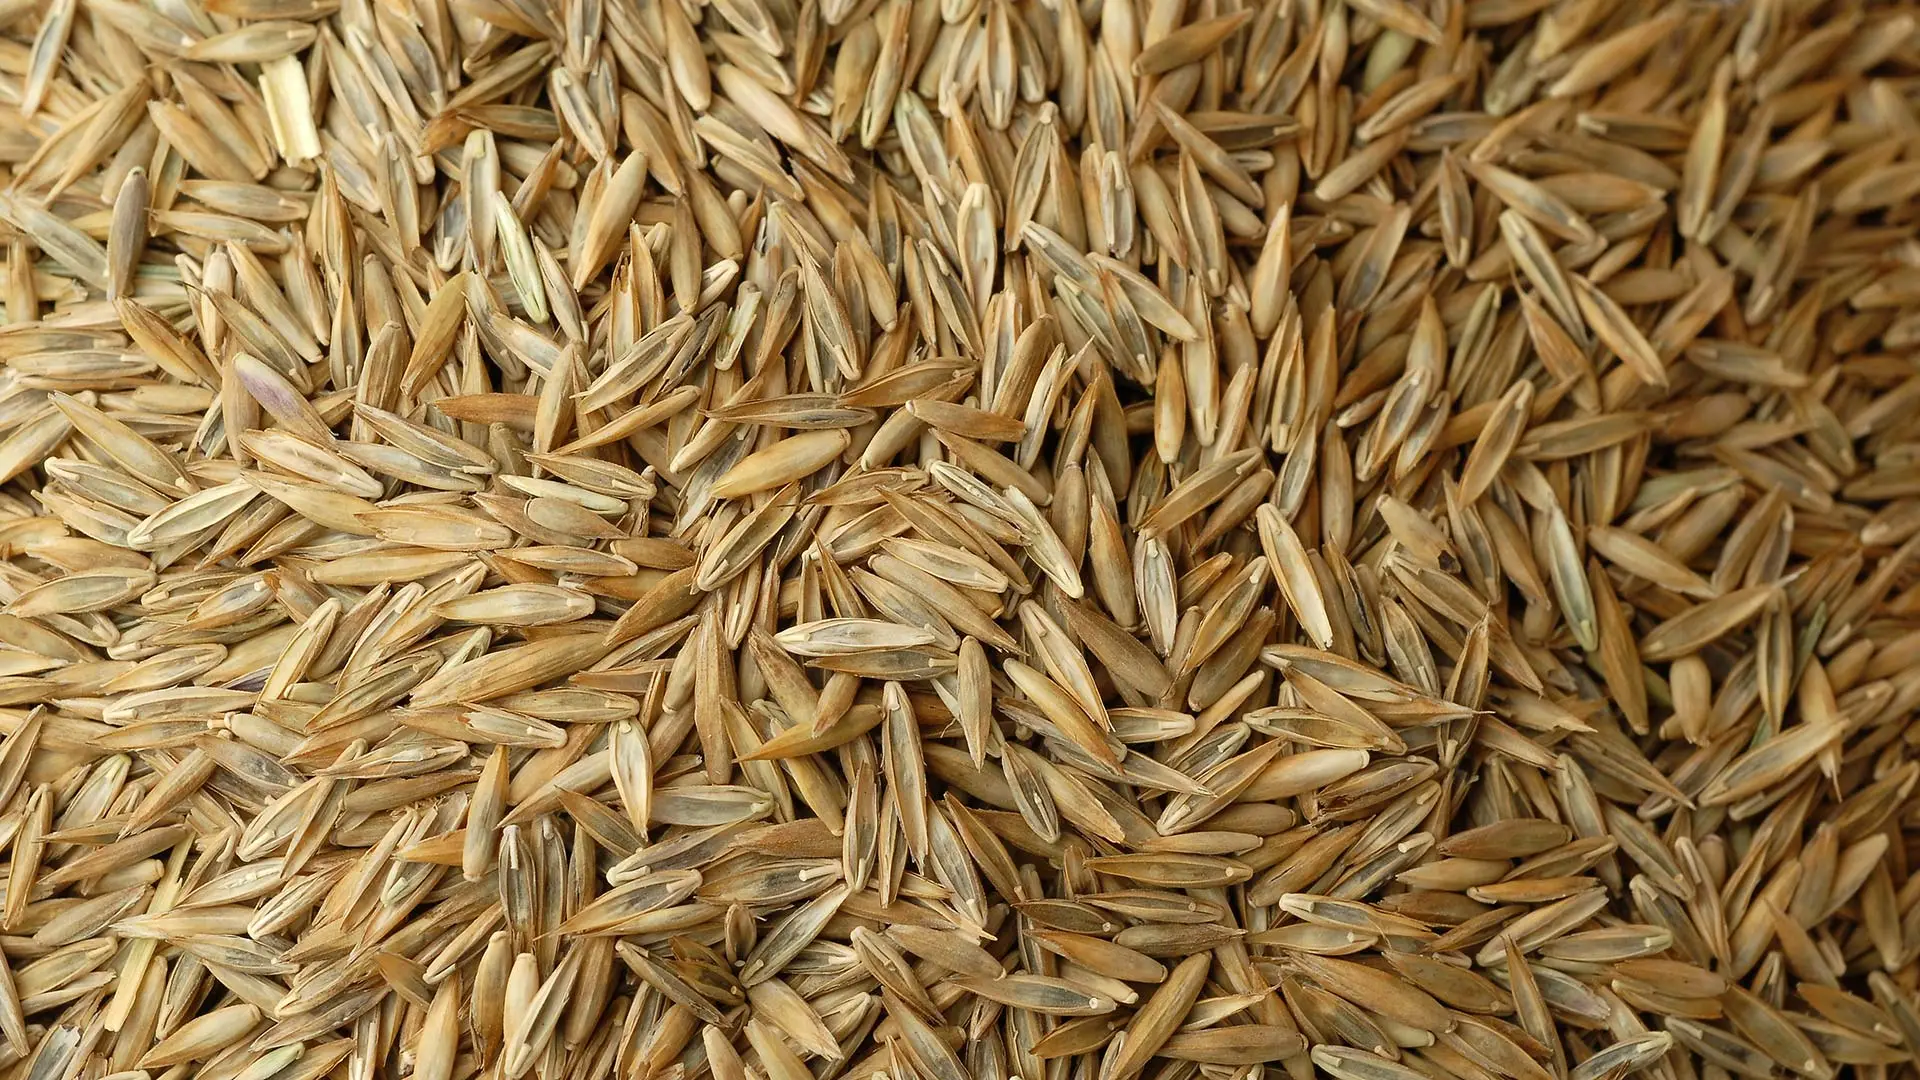 A pile of grass seeds in Omaha, NE.